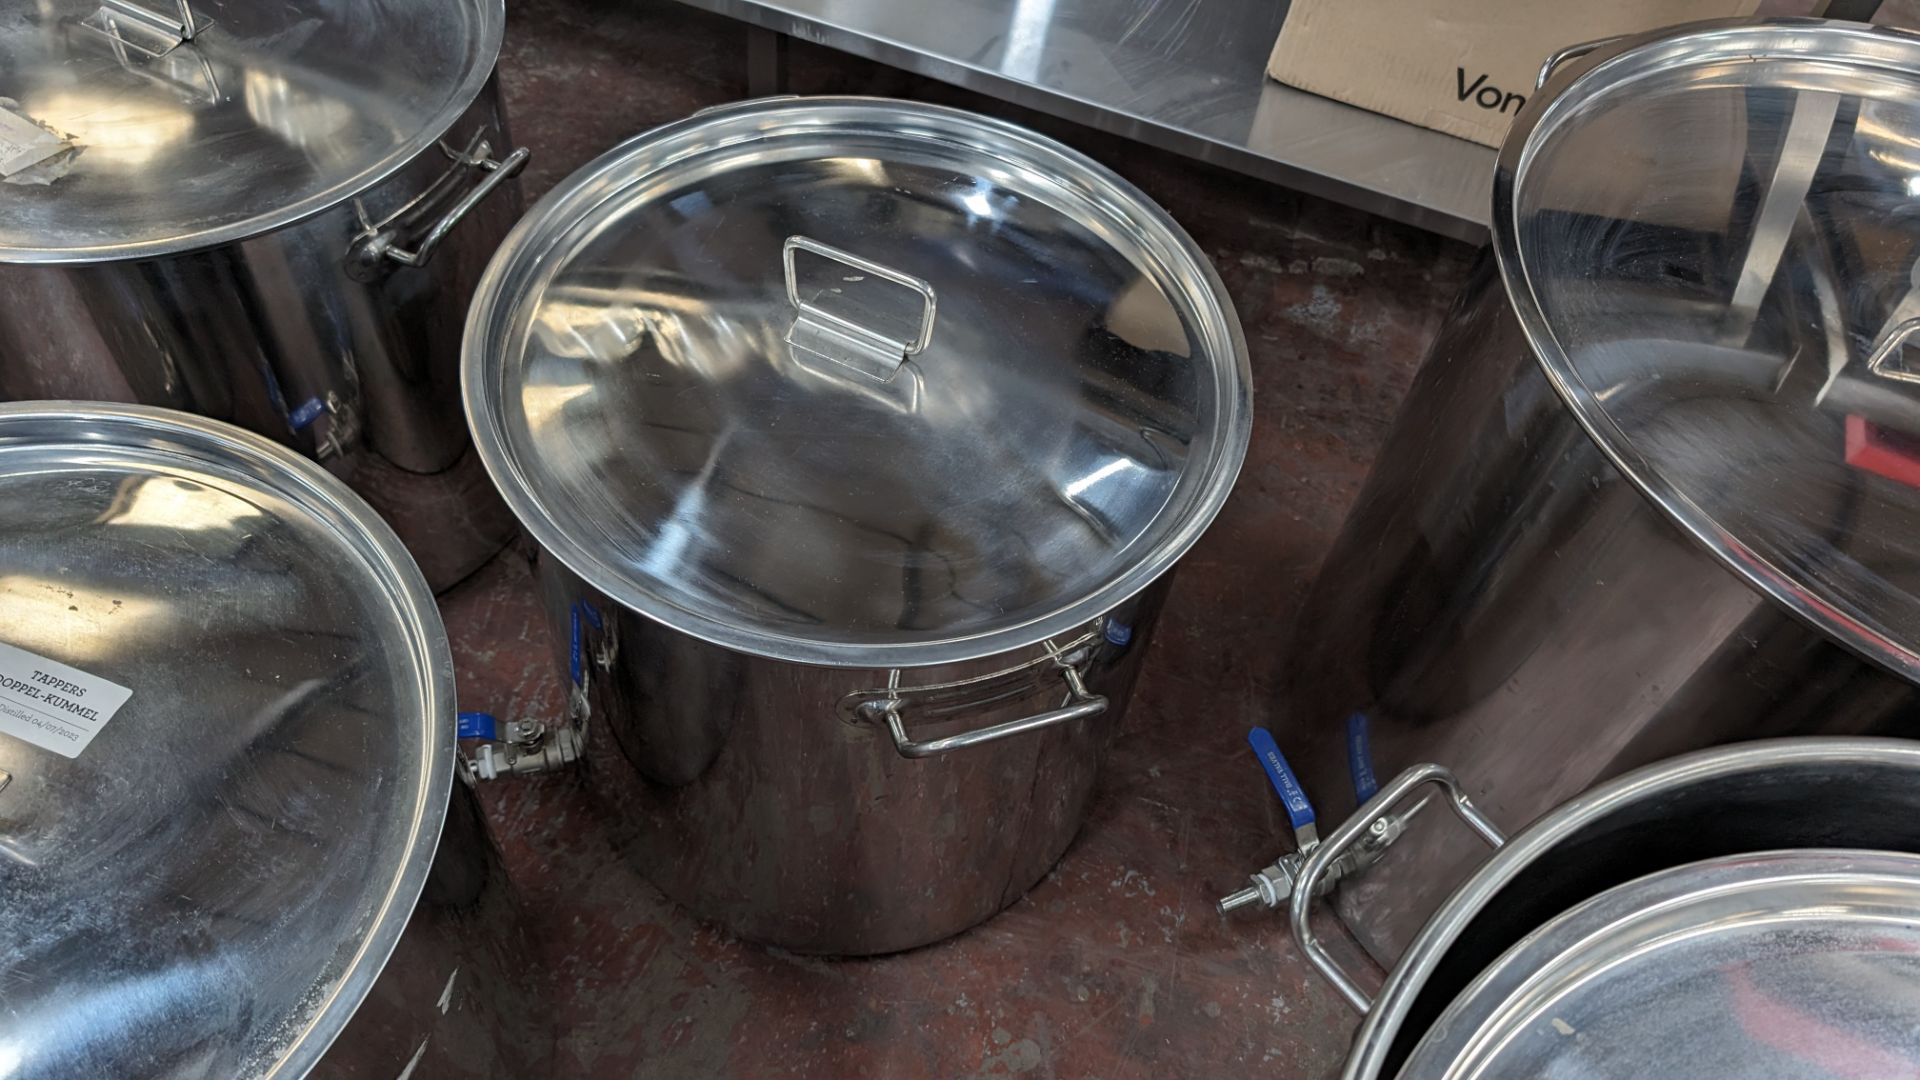 3 off stainless steel brew kettles. Each with their own lid. Capacity: 50L - Image 5 of 6